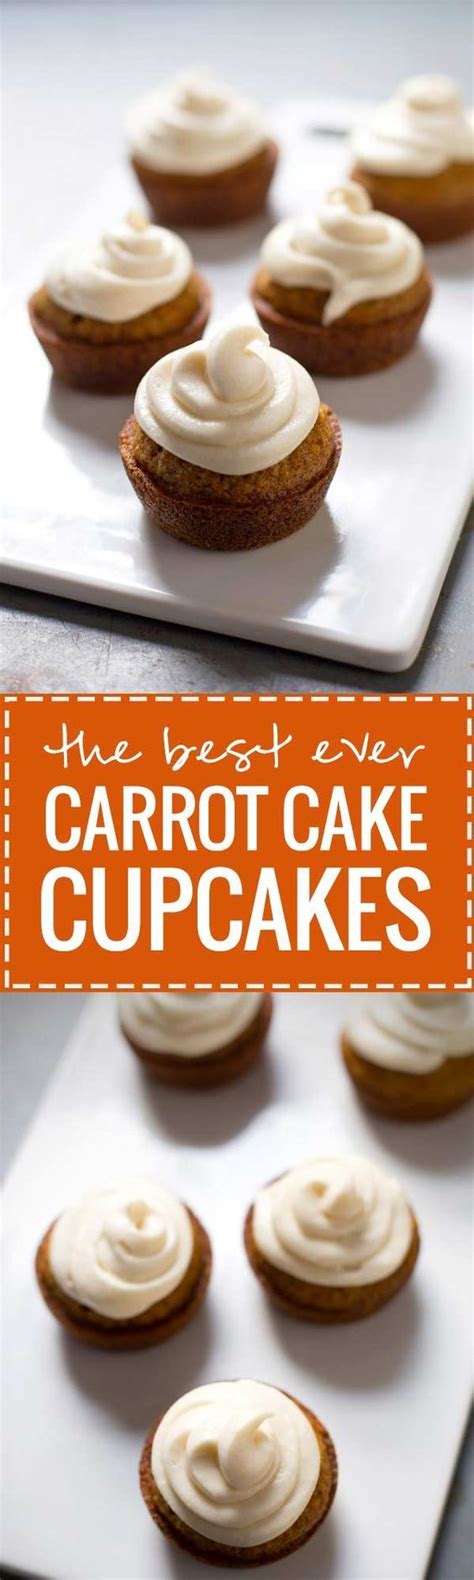 Ultimate cookies 'n' cream marathon! The Best Carrot Cake Cupcakes with Cream Cheese Frosting ...